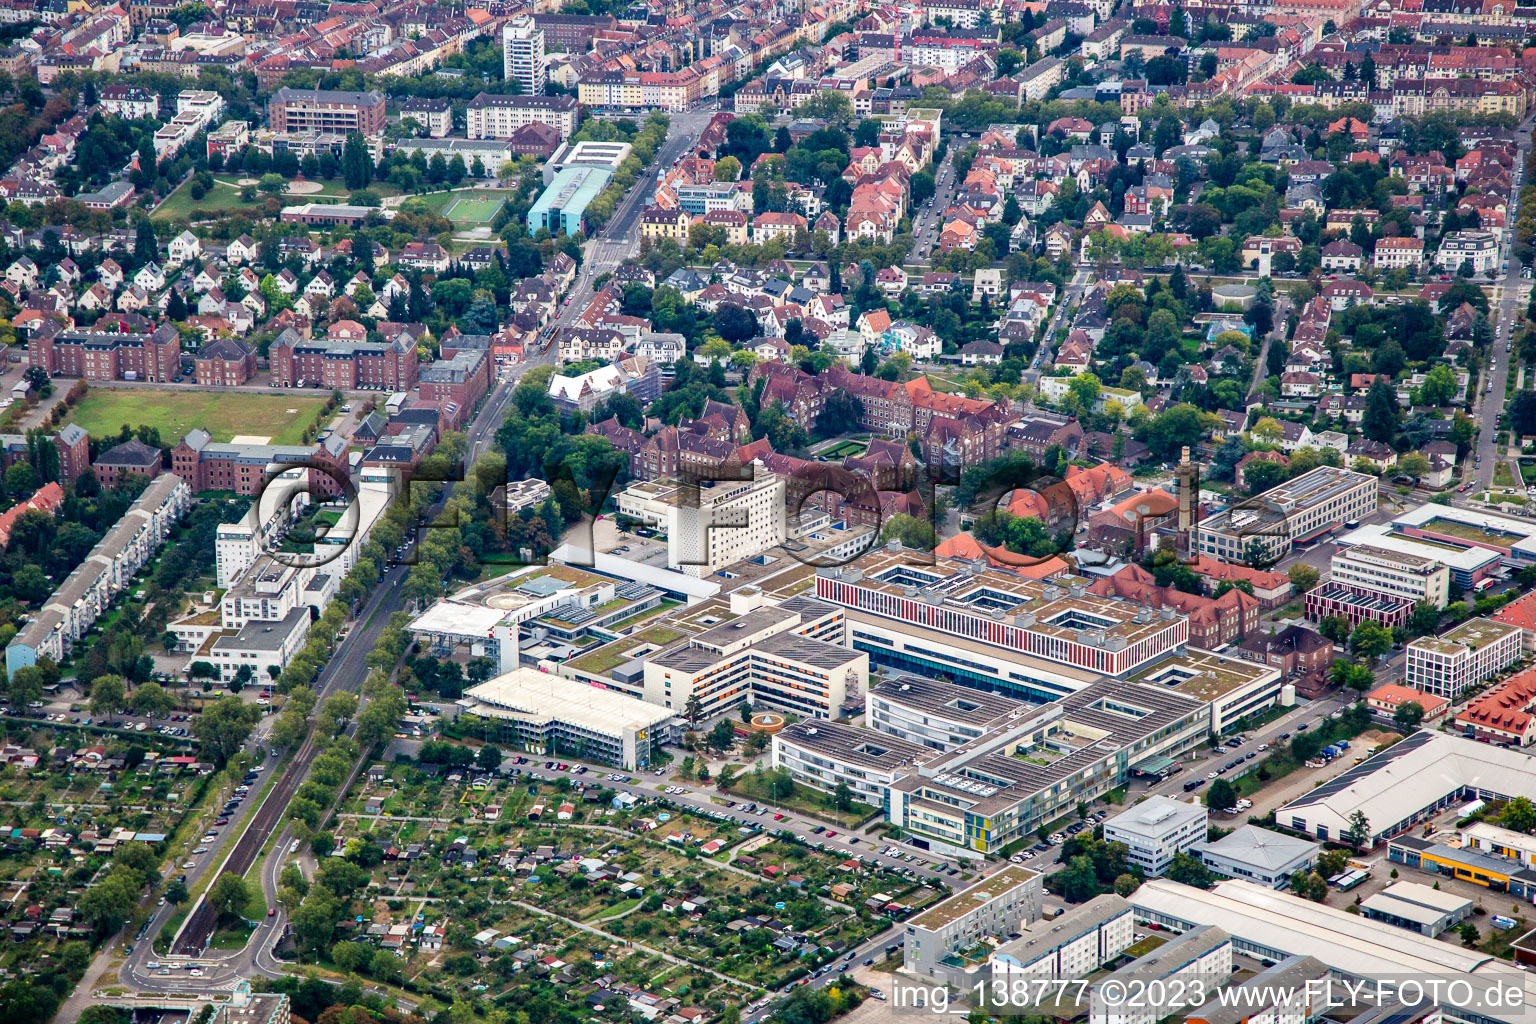 Municipal hospital Karlsruhe in the district Nordweststadt in Karlsruhe in the state Baden-Wuerttemberg, Germany from above